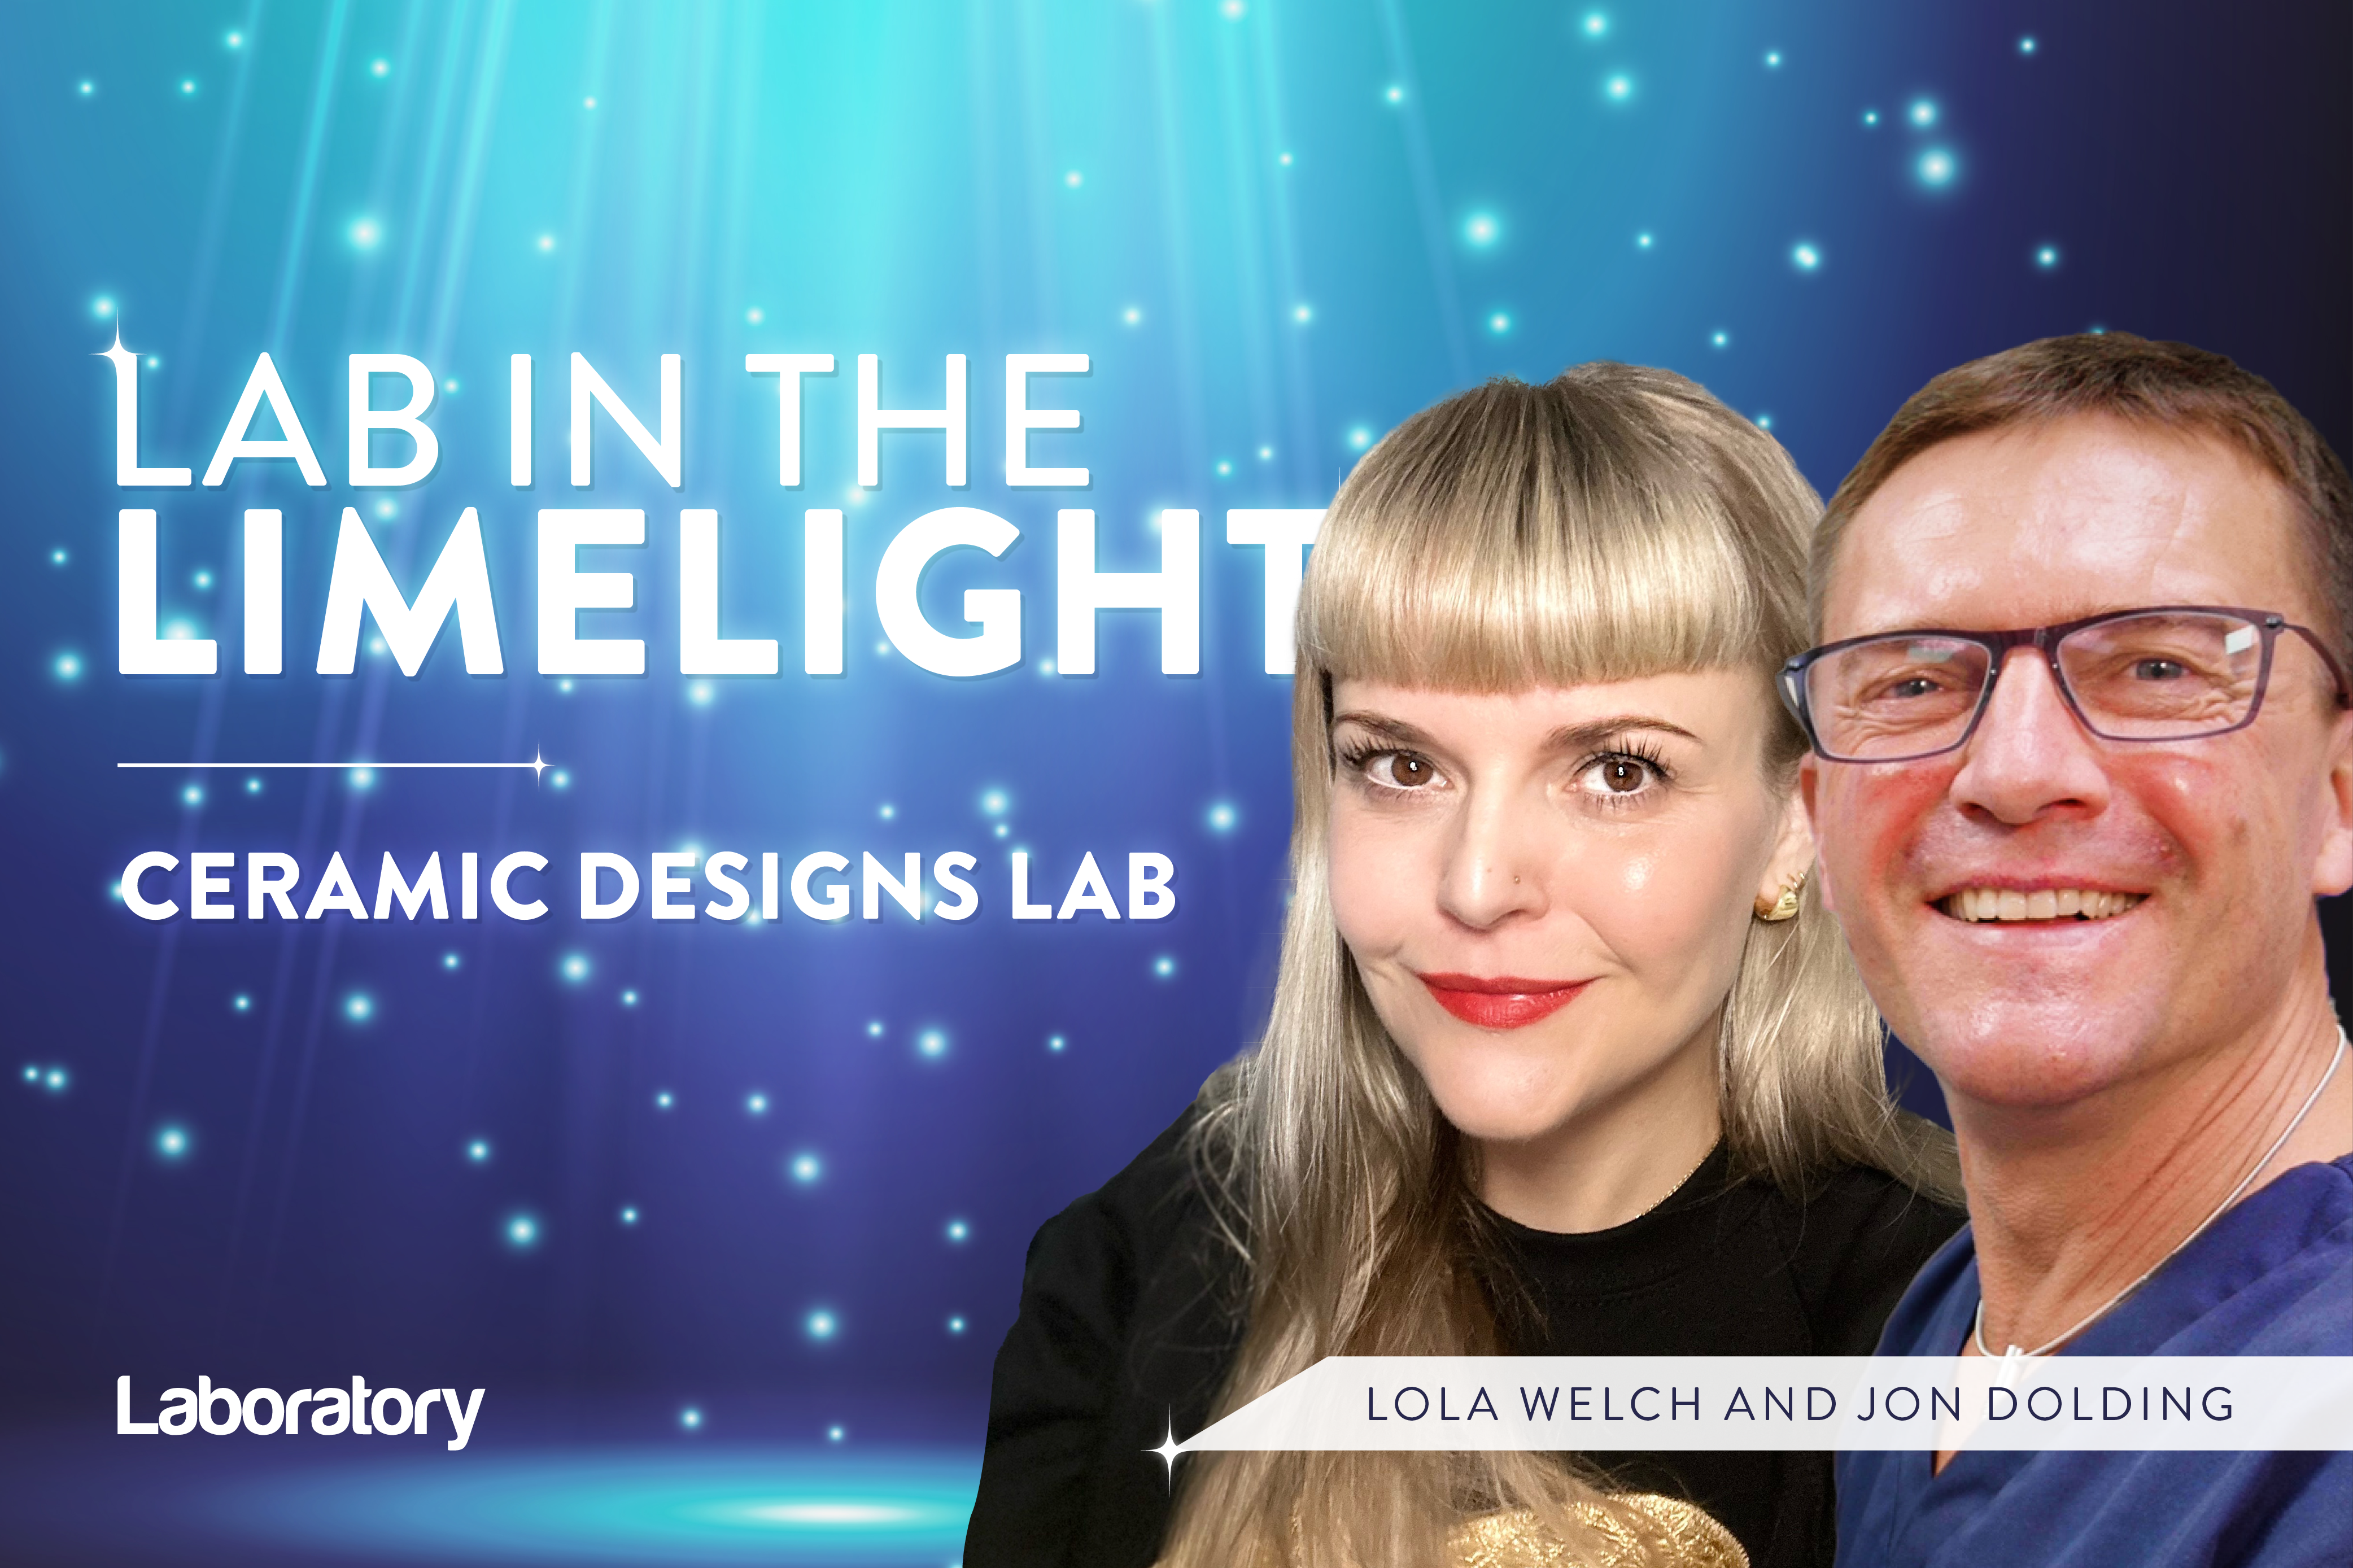 Jon Dolding and Lola Welch from Ceramic Designs Lab share discuss how the business has grown and how to maintain a successful lab.